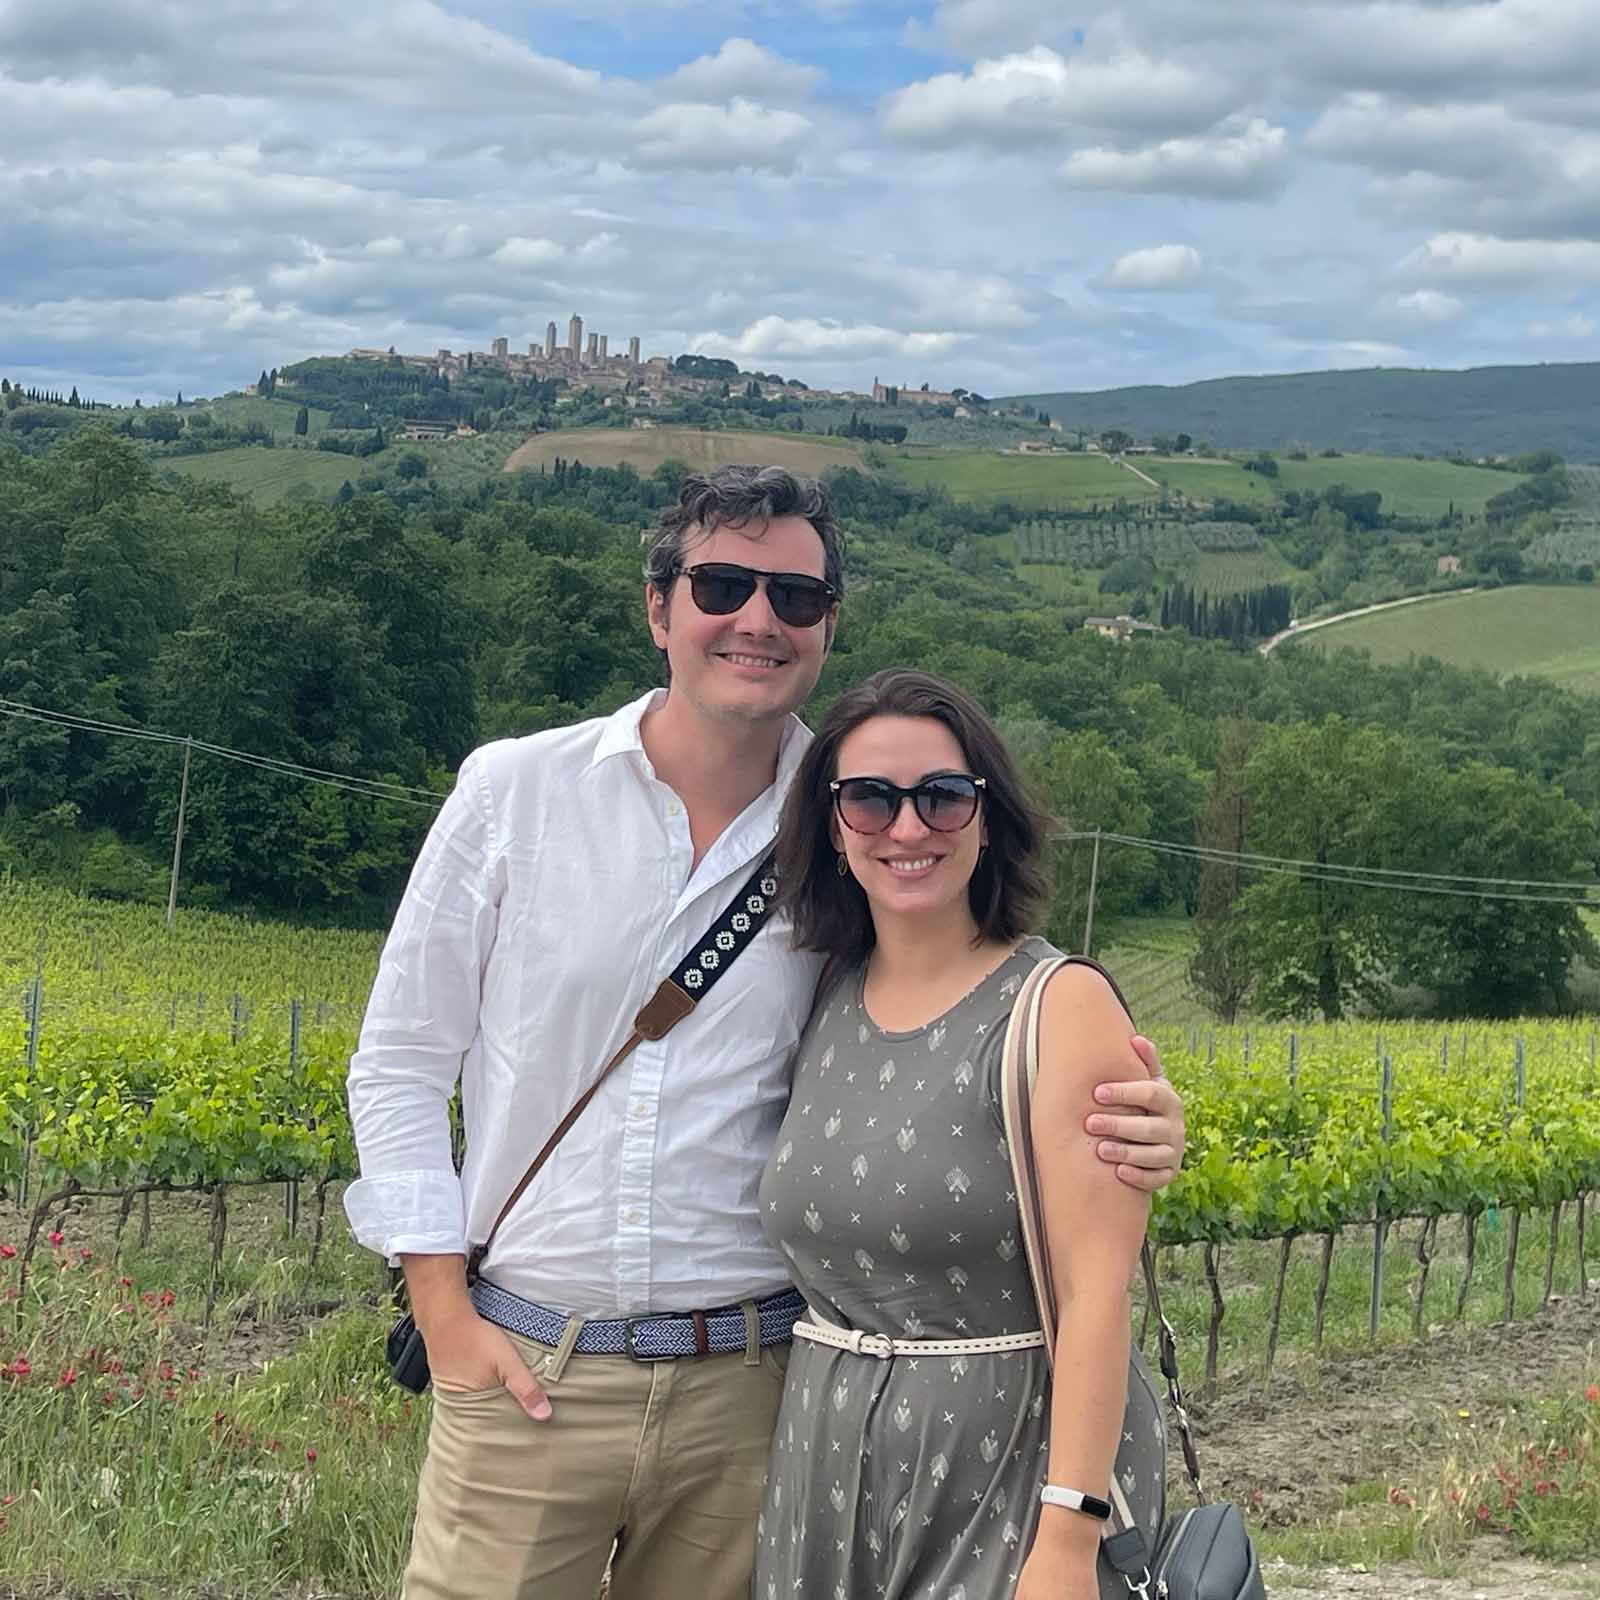 During our anniversary trip to Tuscany, near San Gimignano